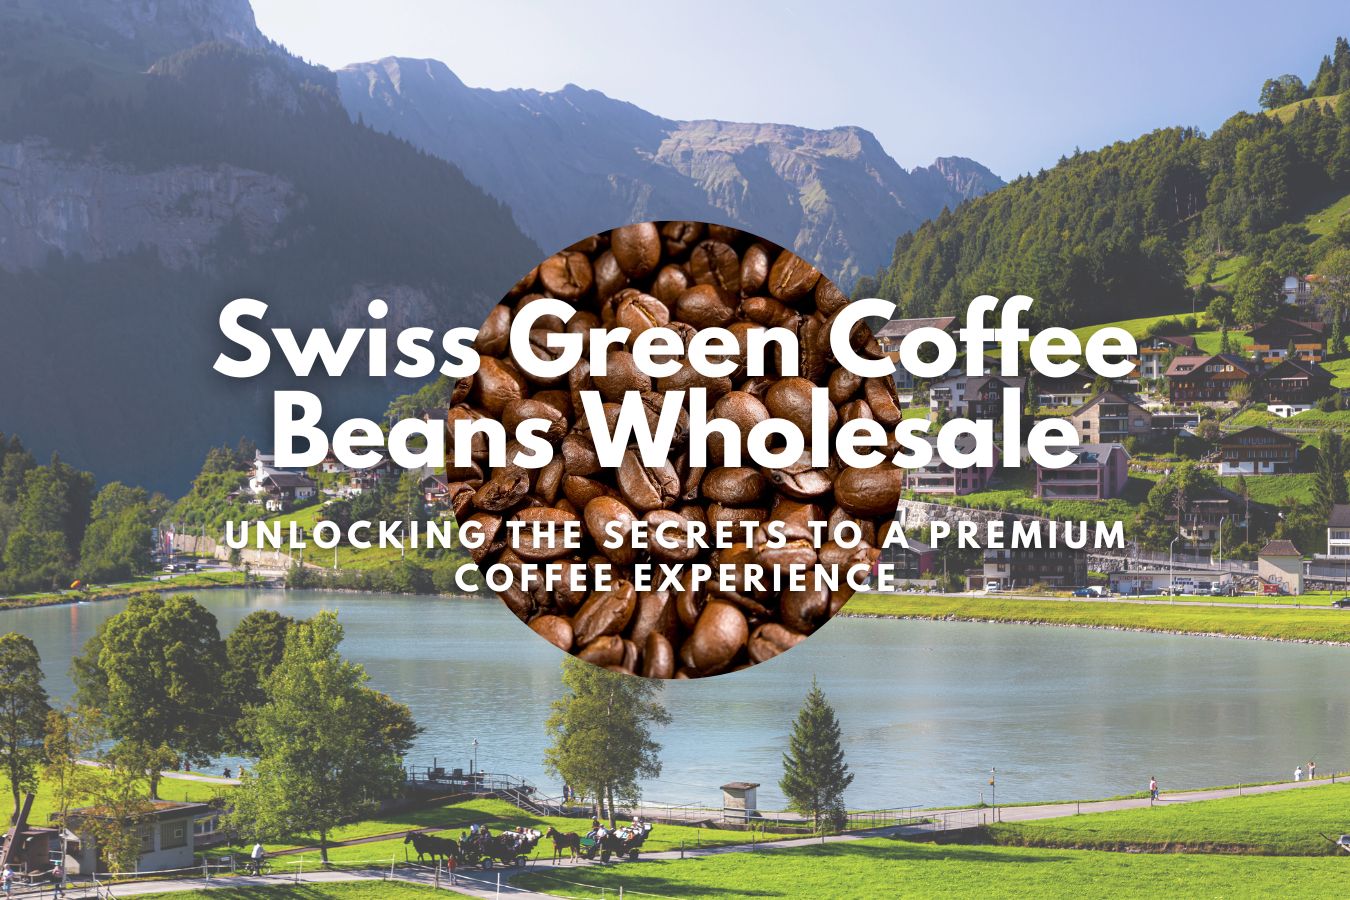 Swiss Green Coffee Beans Wholesale: Unlocking the Secrets to a Premium Coffee Experience